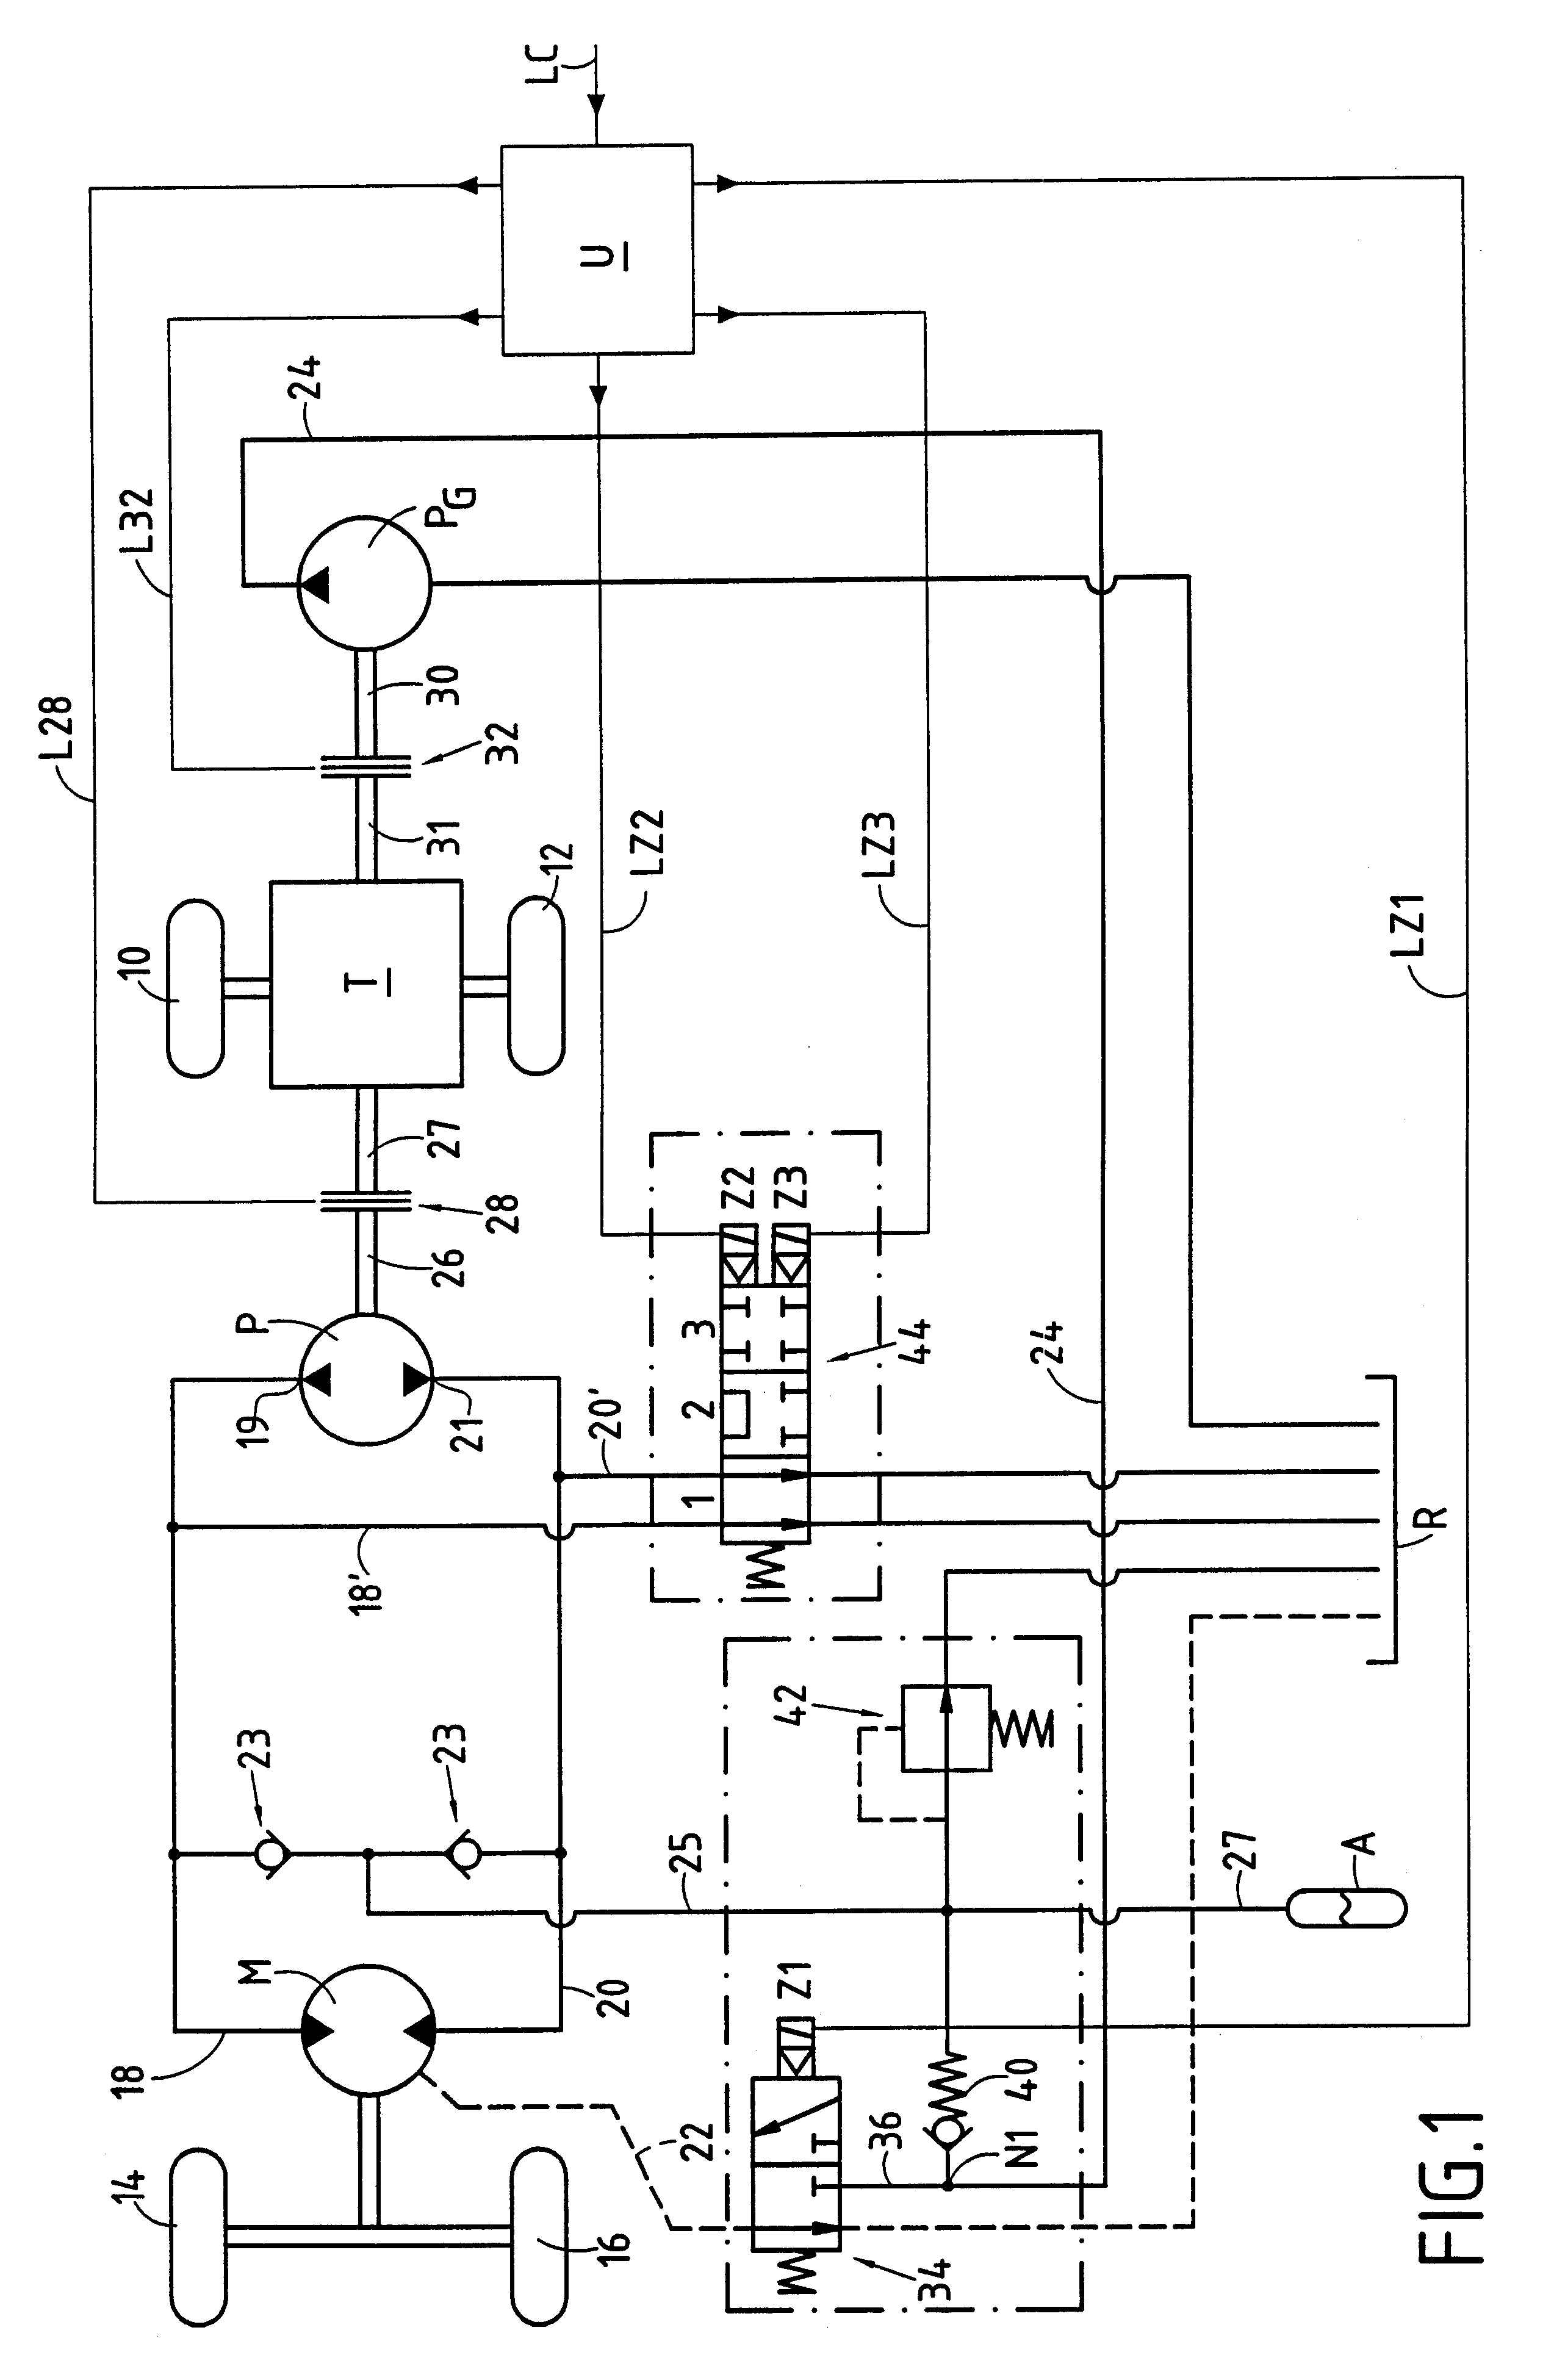 Drive assistance apparatus for a vehicle having a main transmission that is mechanical